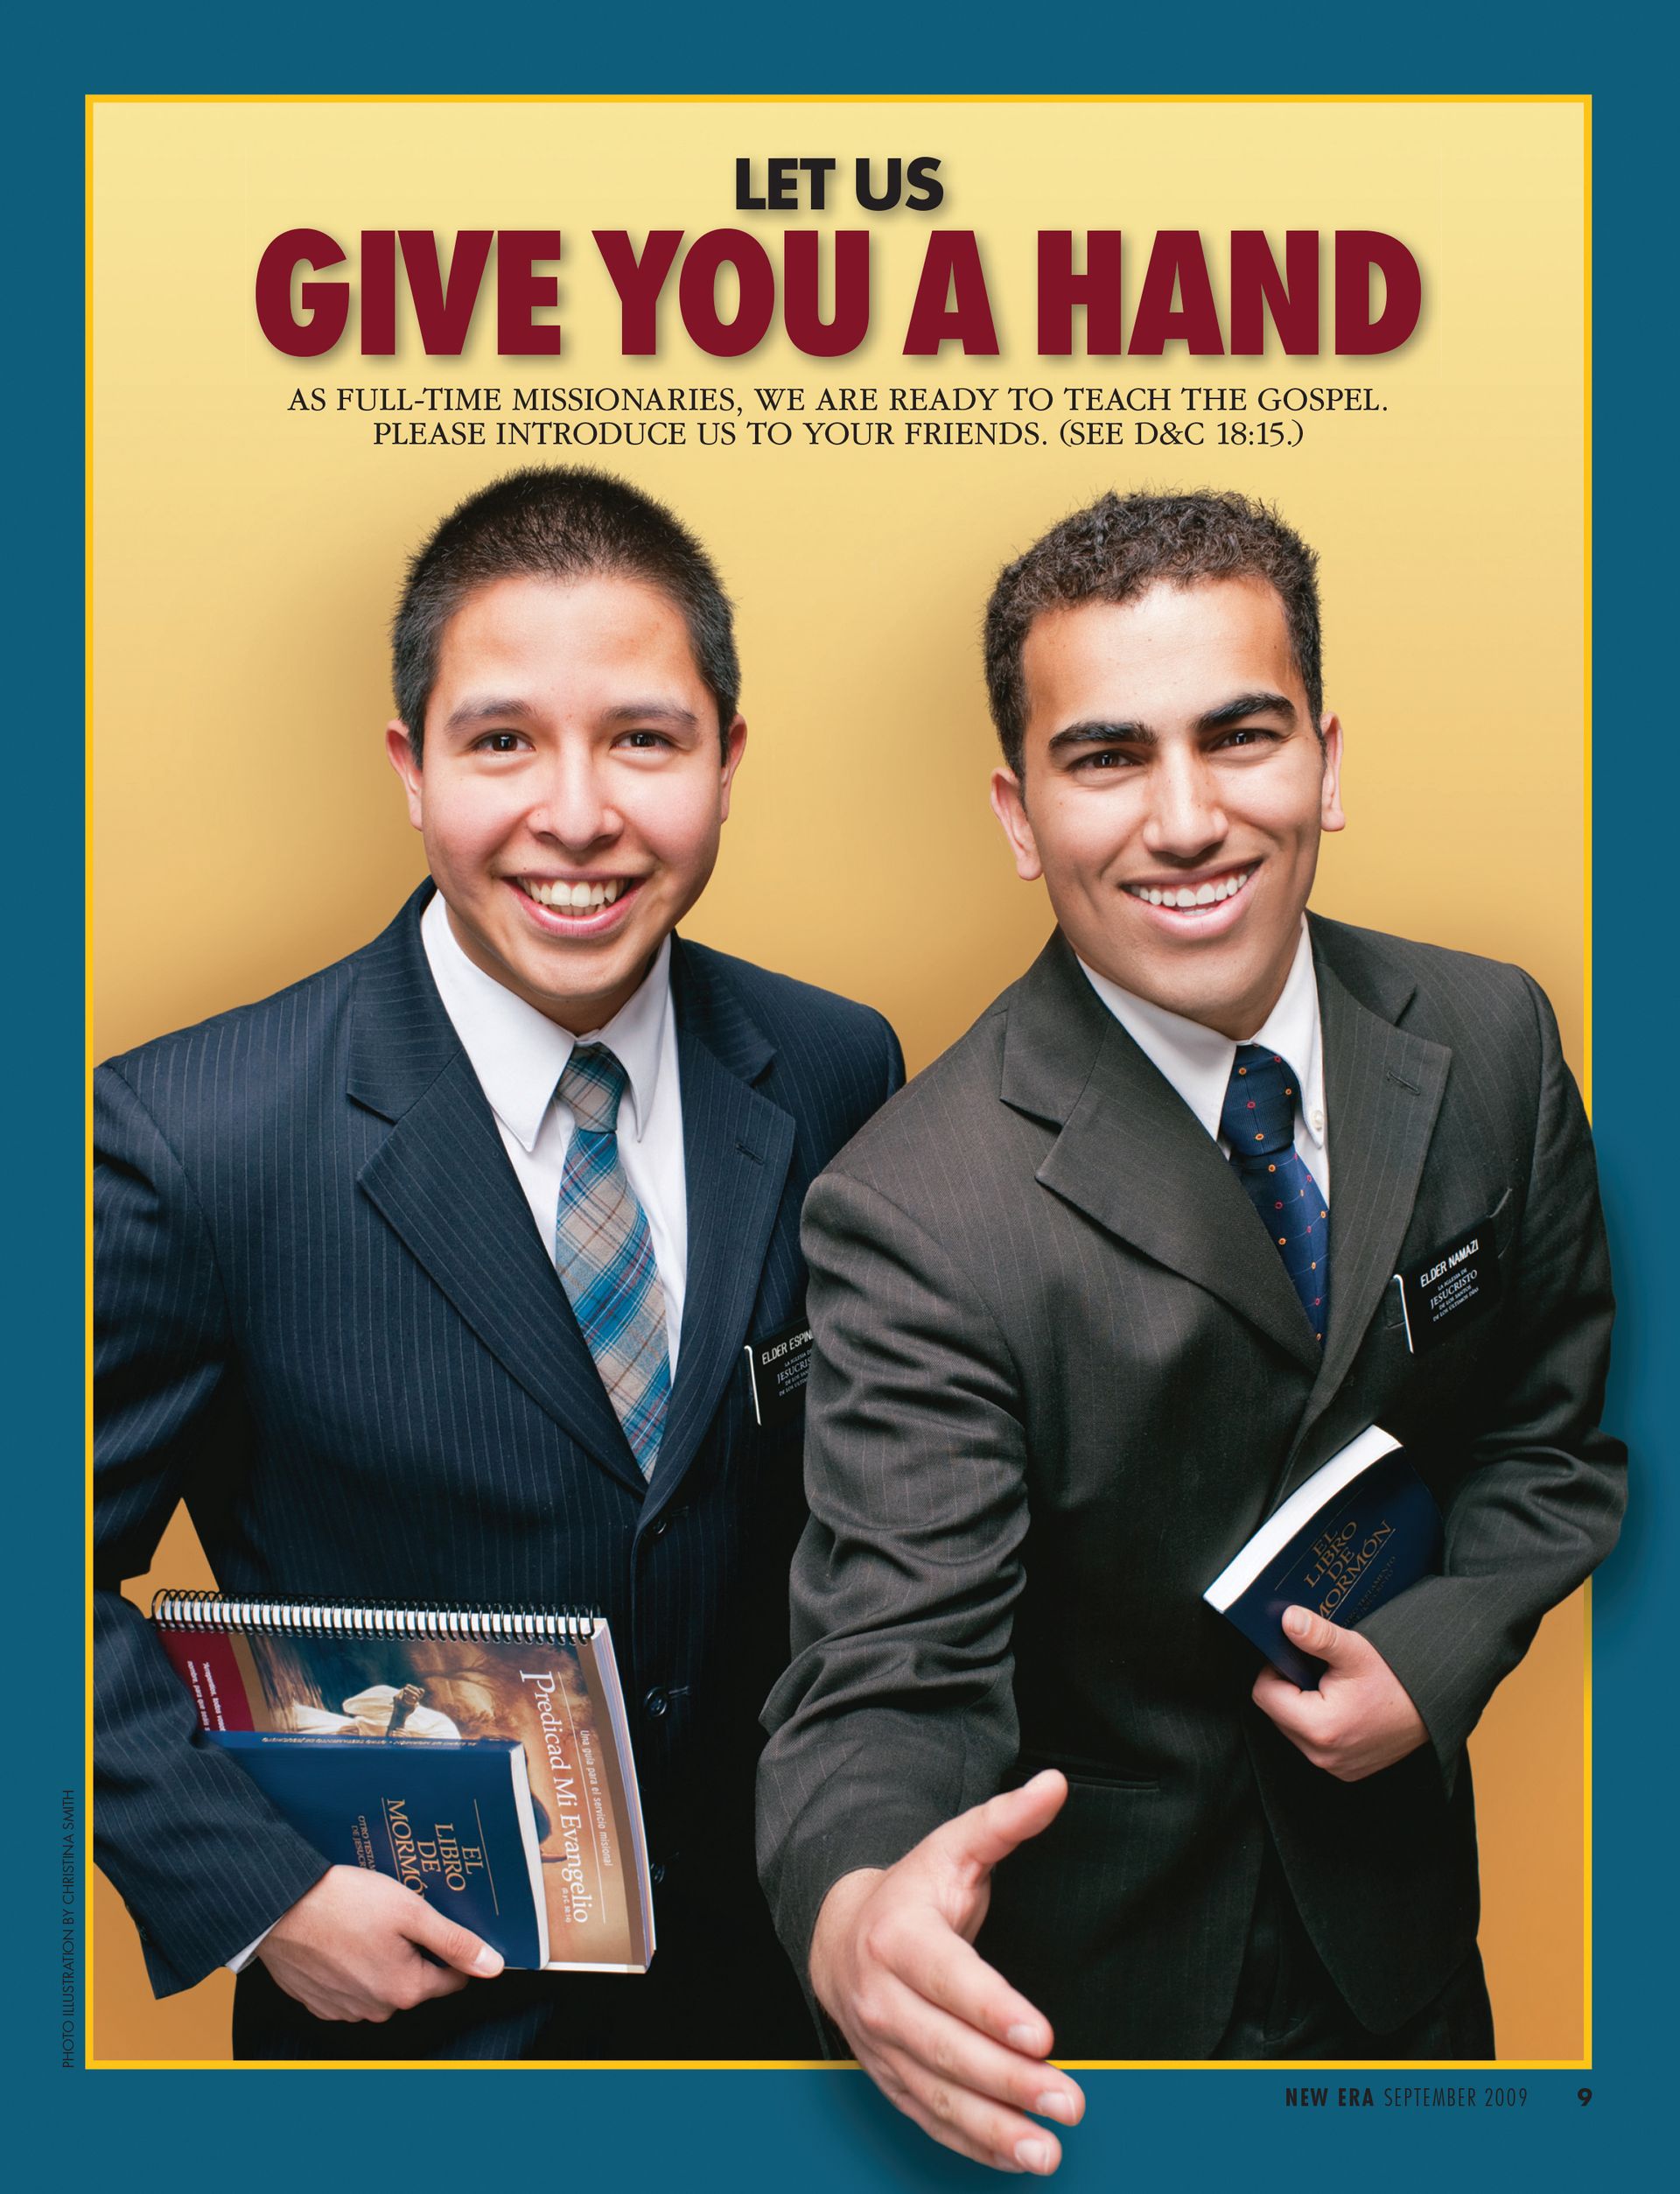 Let Us Give You a Hand. As full-time missionaries, we are ready to teach the gospel. Please introduce us to your friends. (See D&C 18:15.) Sept. 2009 © undefined ipCode 1.